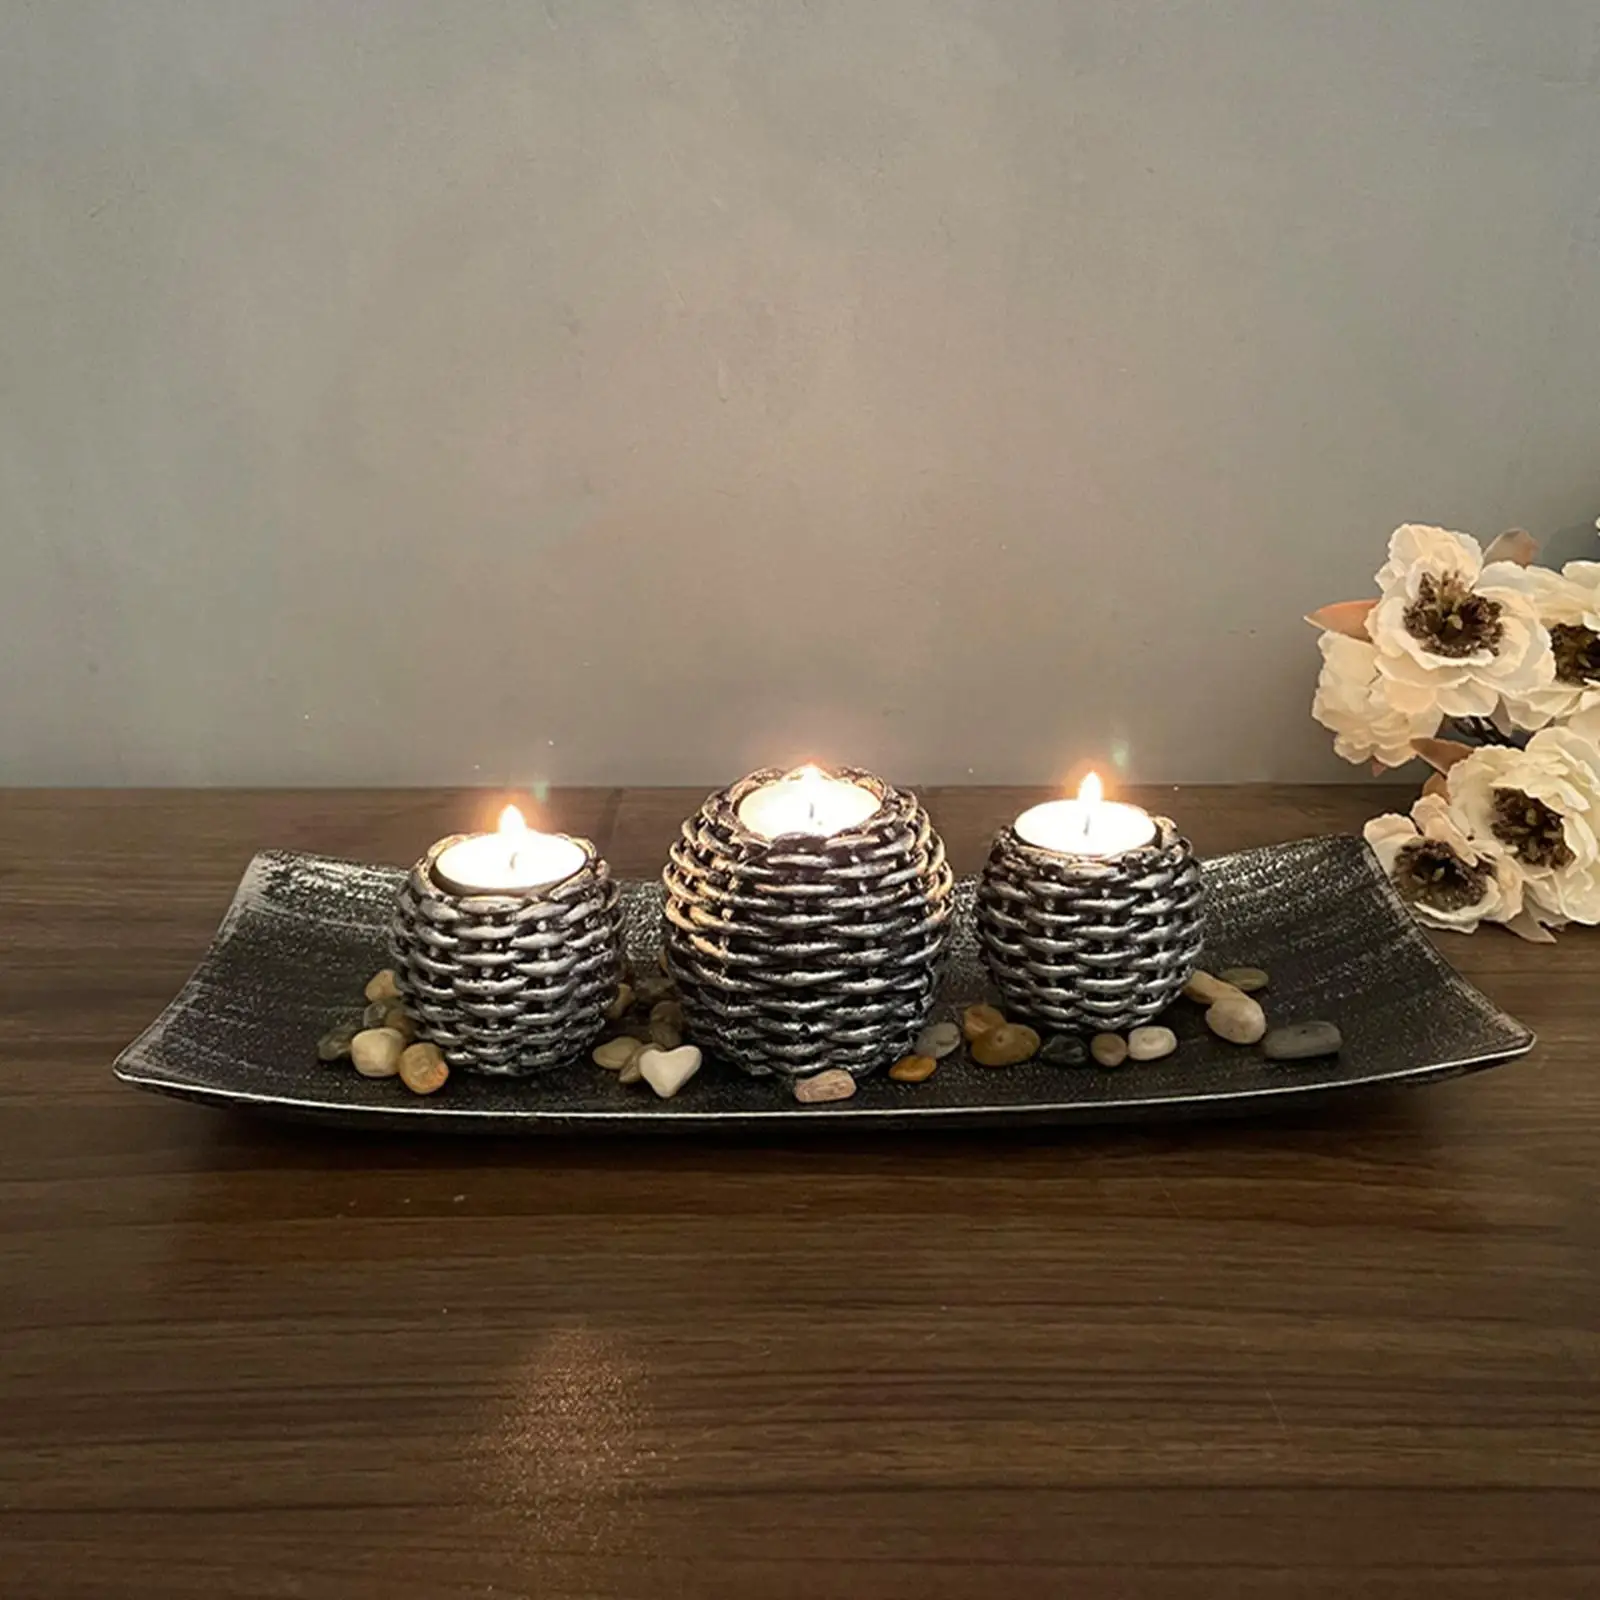 W/ Cups Rattan Design Candle Holder Resin Candlestick Resin Crafts Home Furnishing Easy Use Candle Holder Set for Hotel Ornament